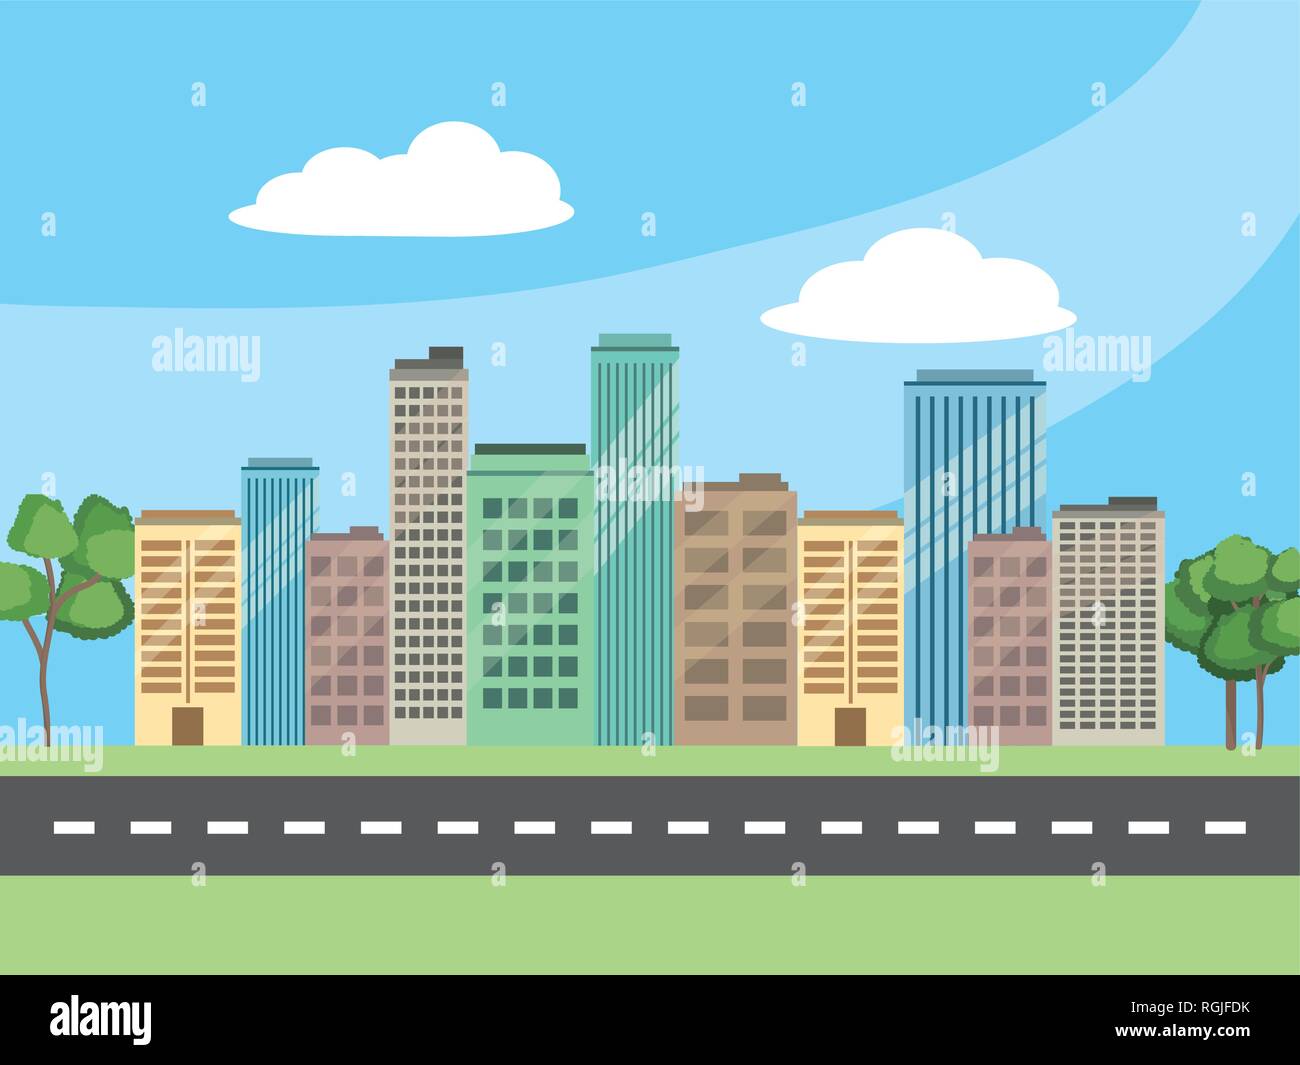 real state buildings cartoon Stock Vector